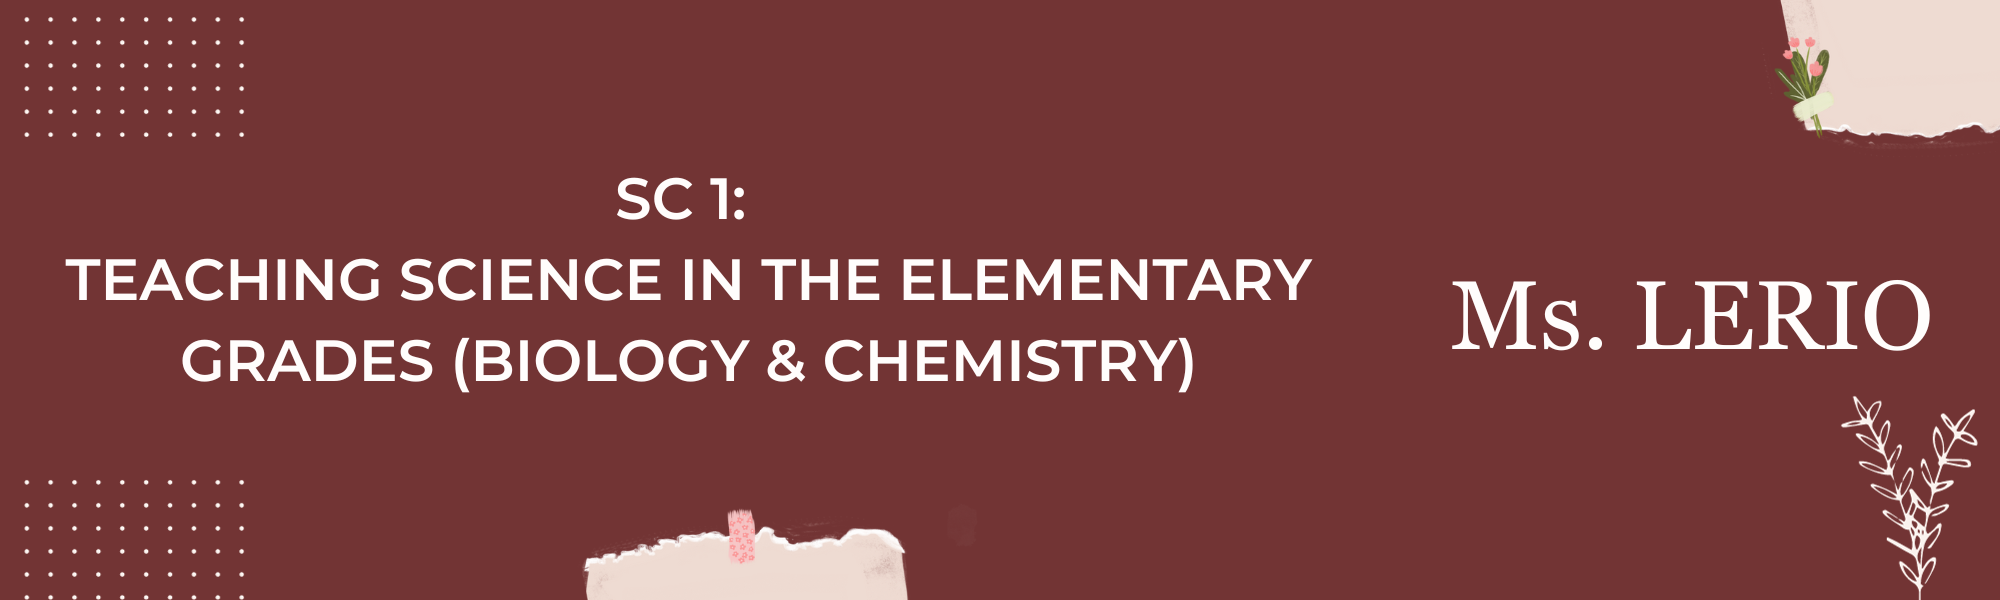 SC 1 - TEACHING SCIENCE IN ELEM. GRADES (BIOLOGY AND CHEMISTRY) 